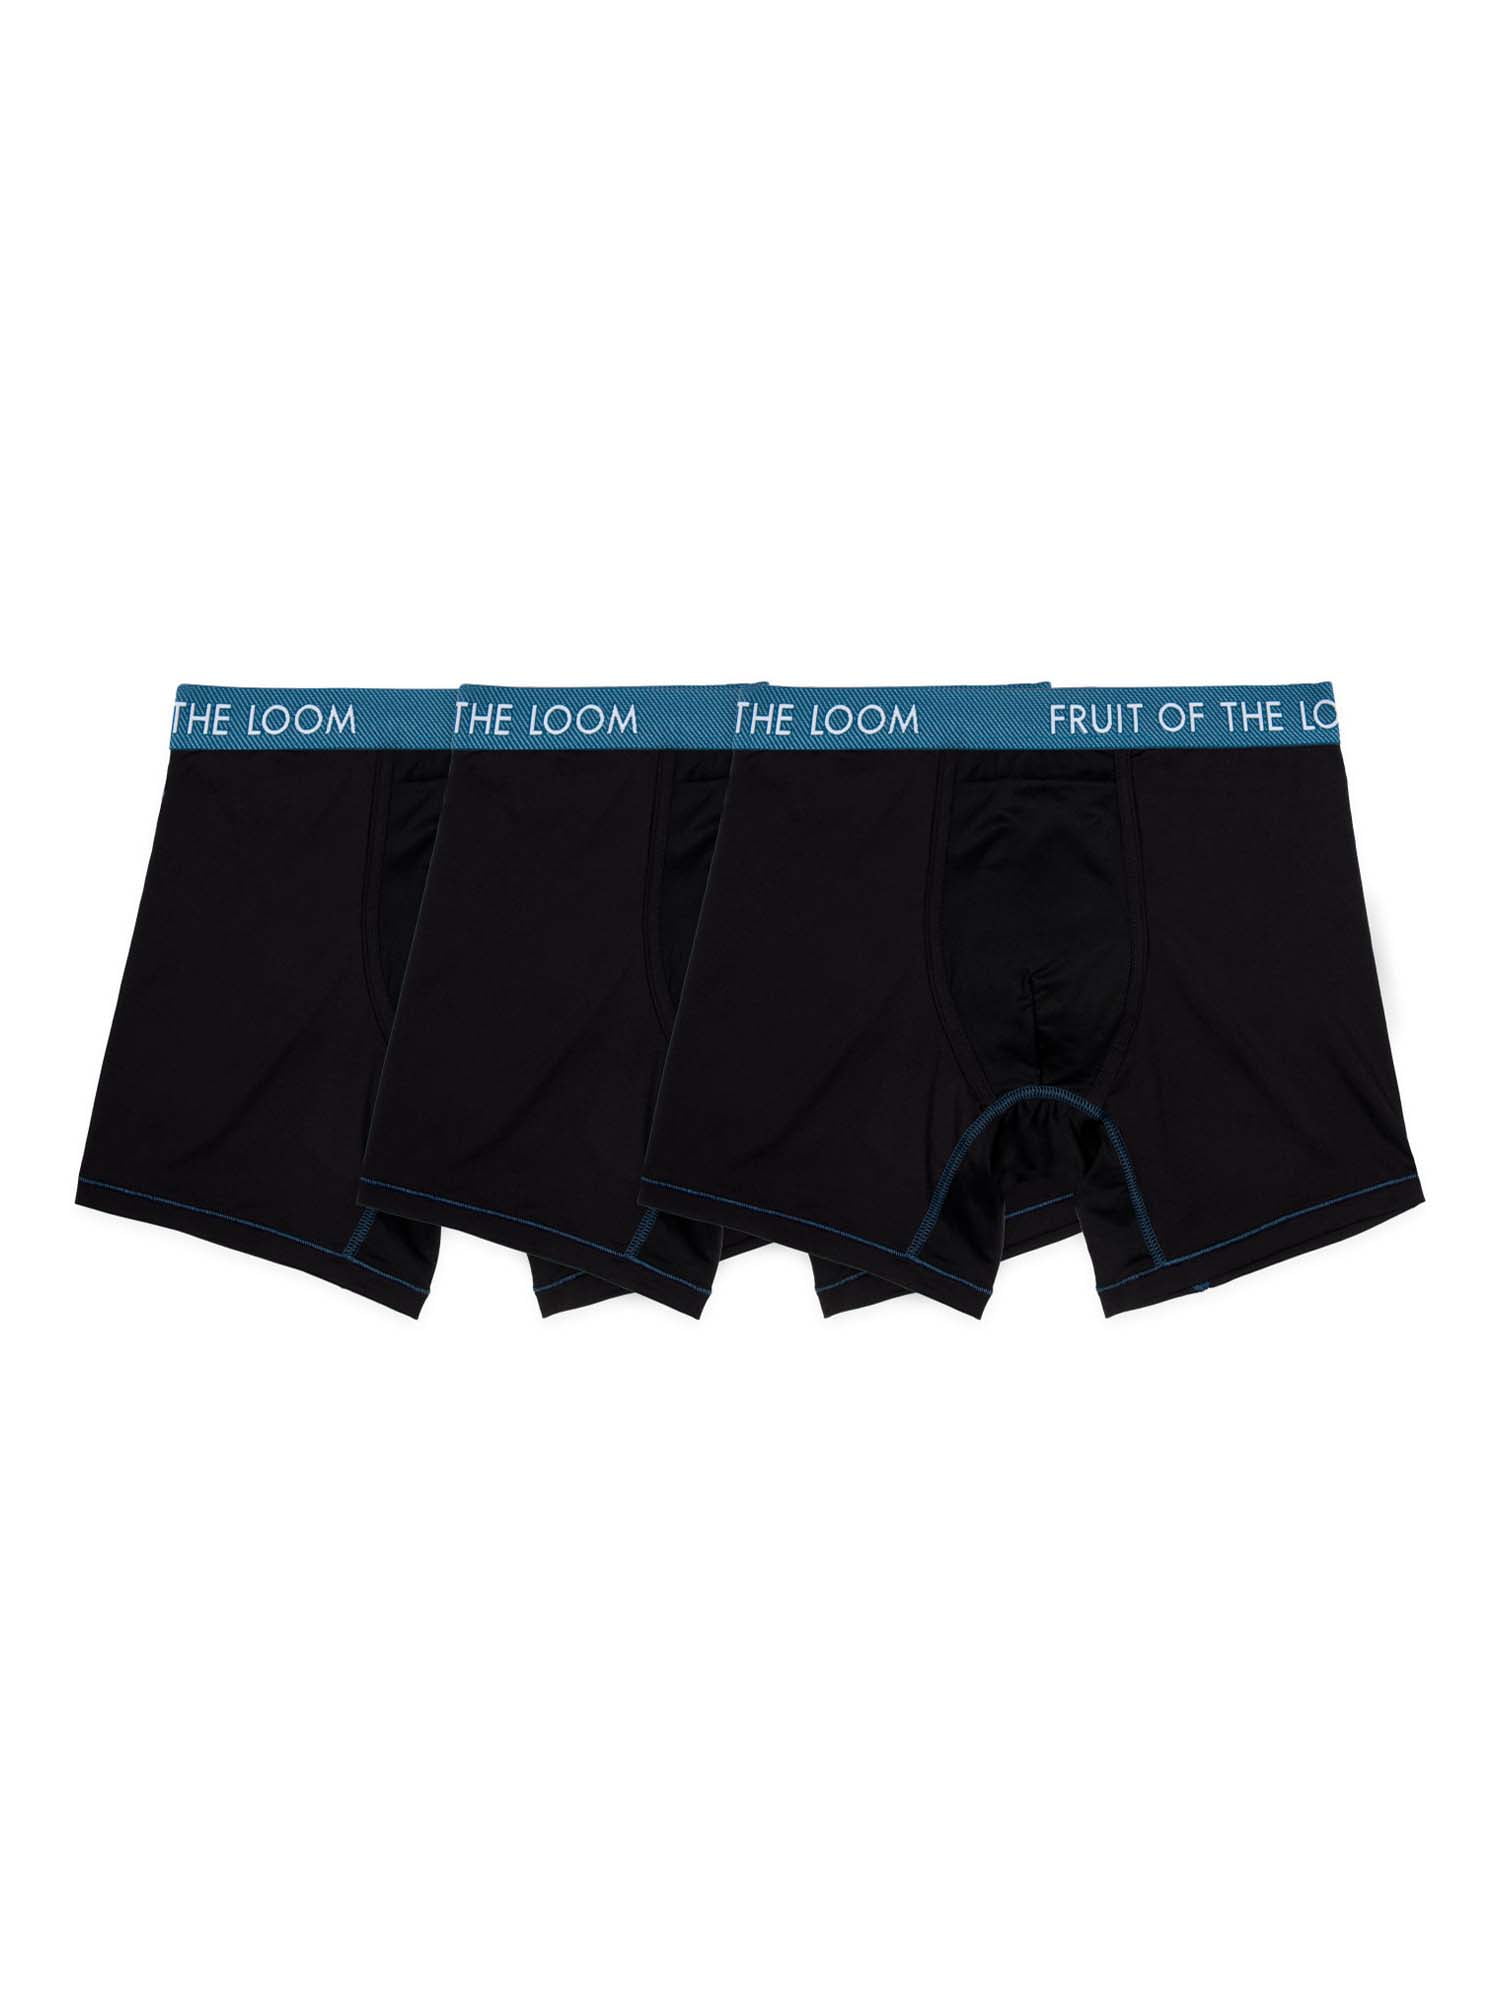 Fruit of the Loom Men's Getaway Collection Long Leg Boxer Briefs, 3 Pack 